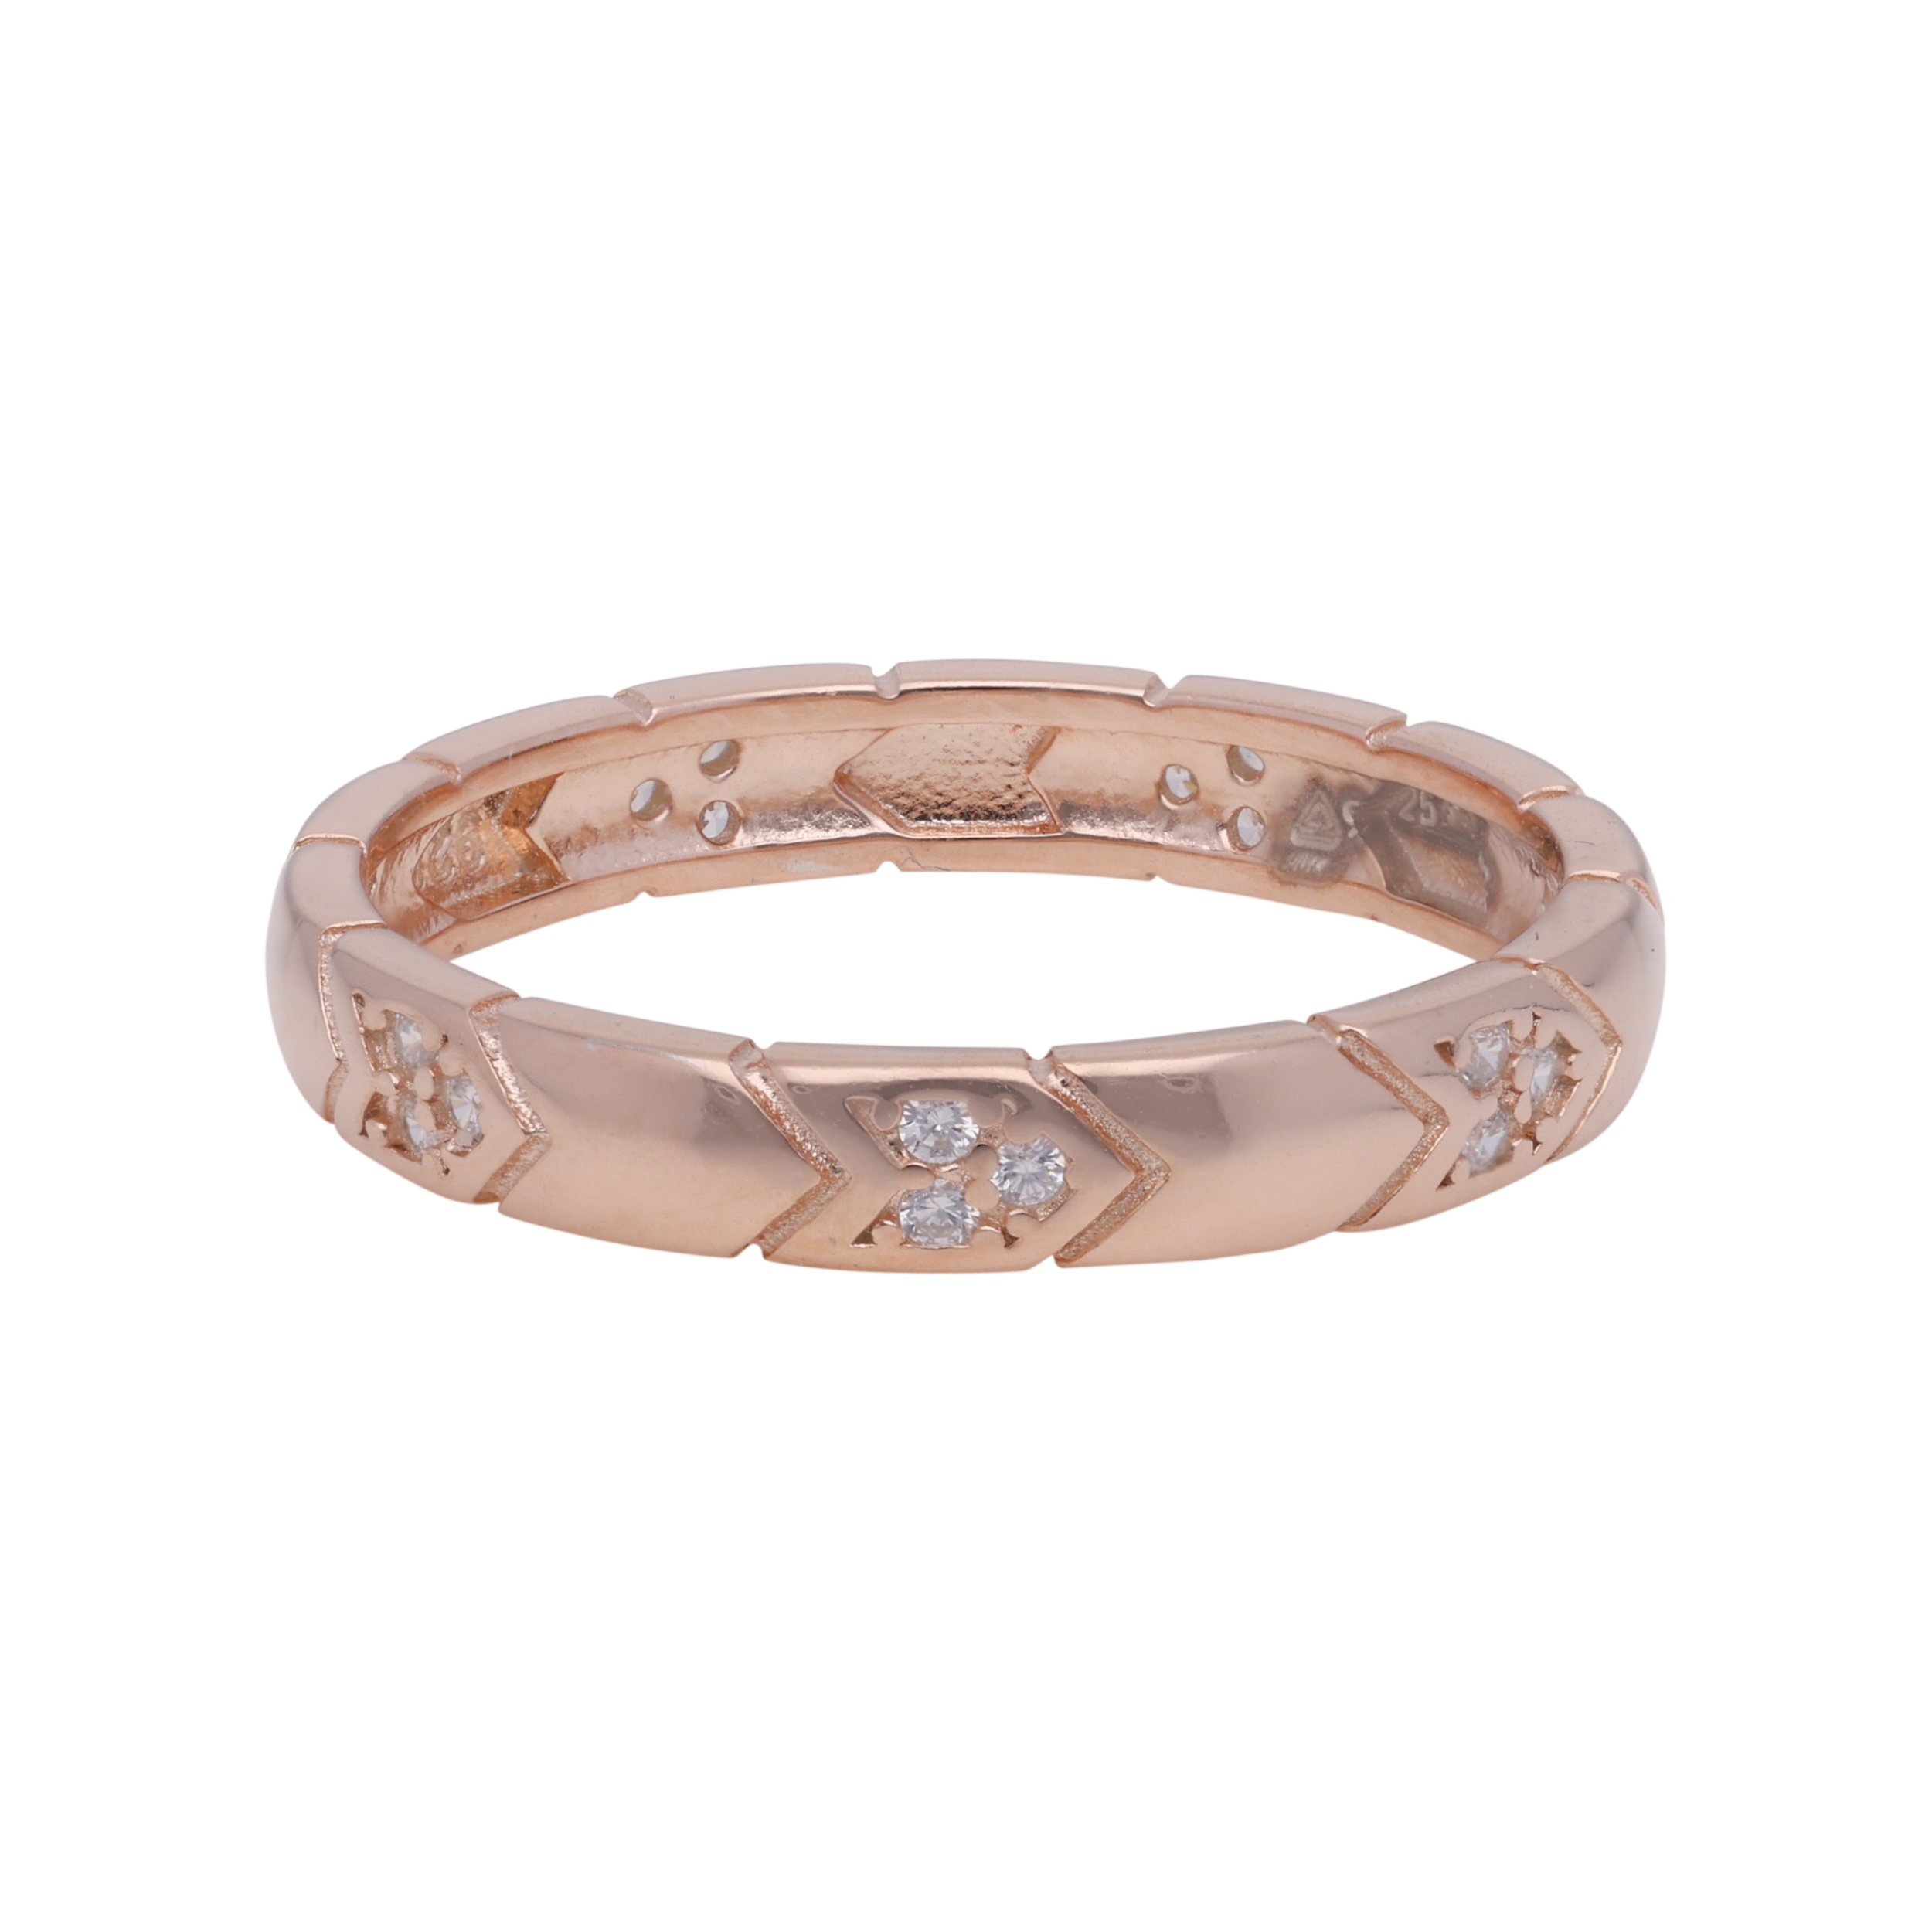 Radiant Glow: Sterling Silver Band Ring with Cubic Zirconia Sparkle | SKU : 0019883830, 0019883885, 0019883878